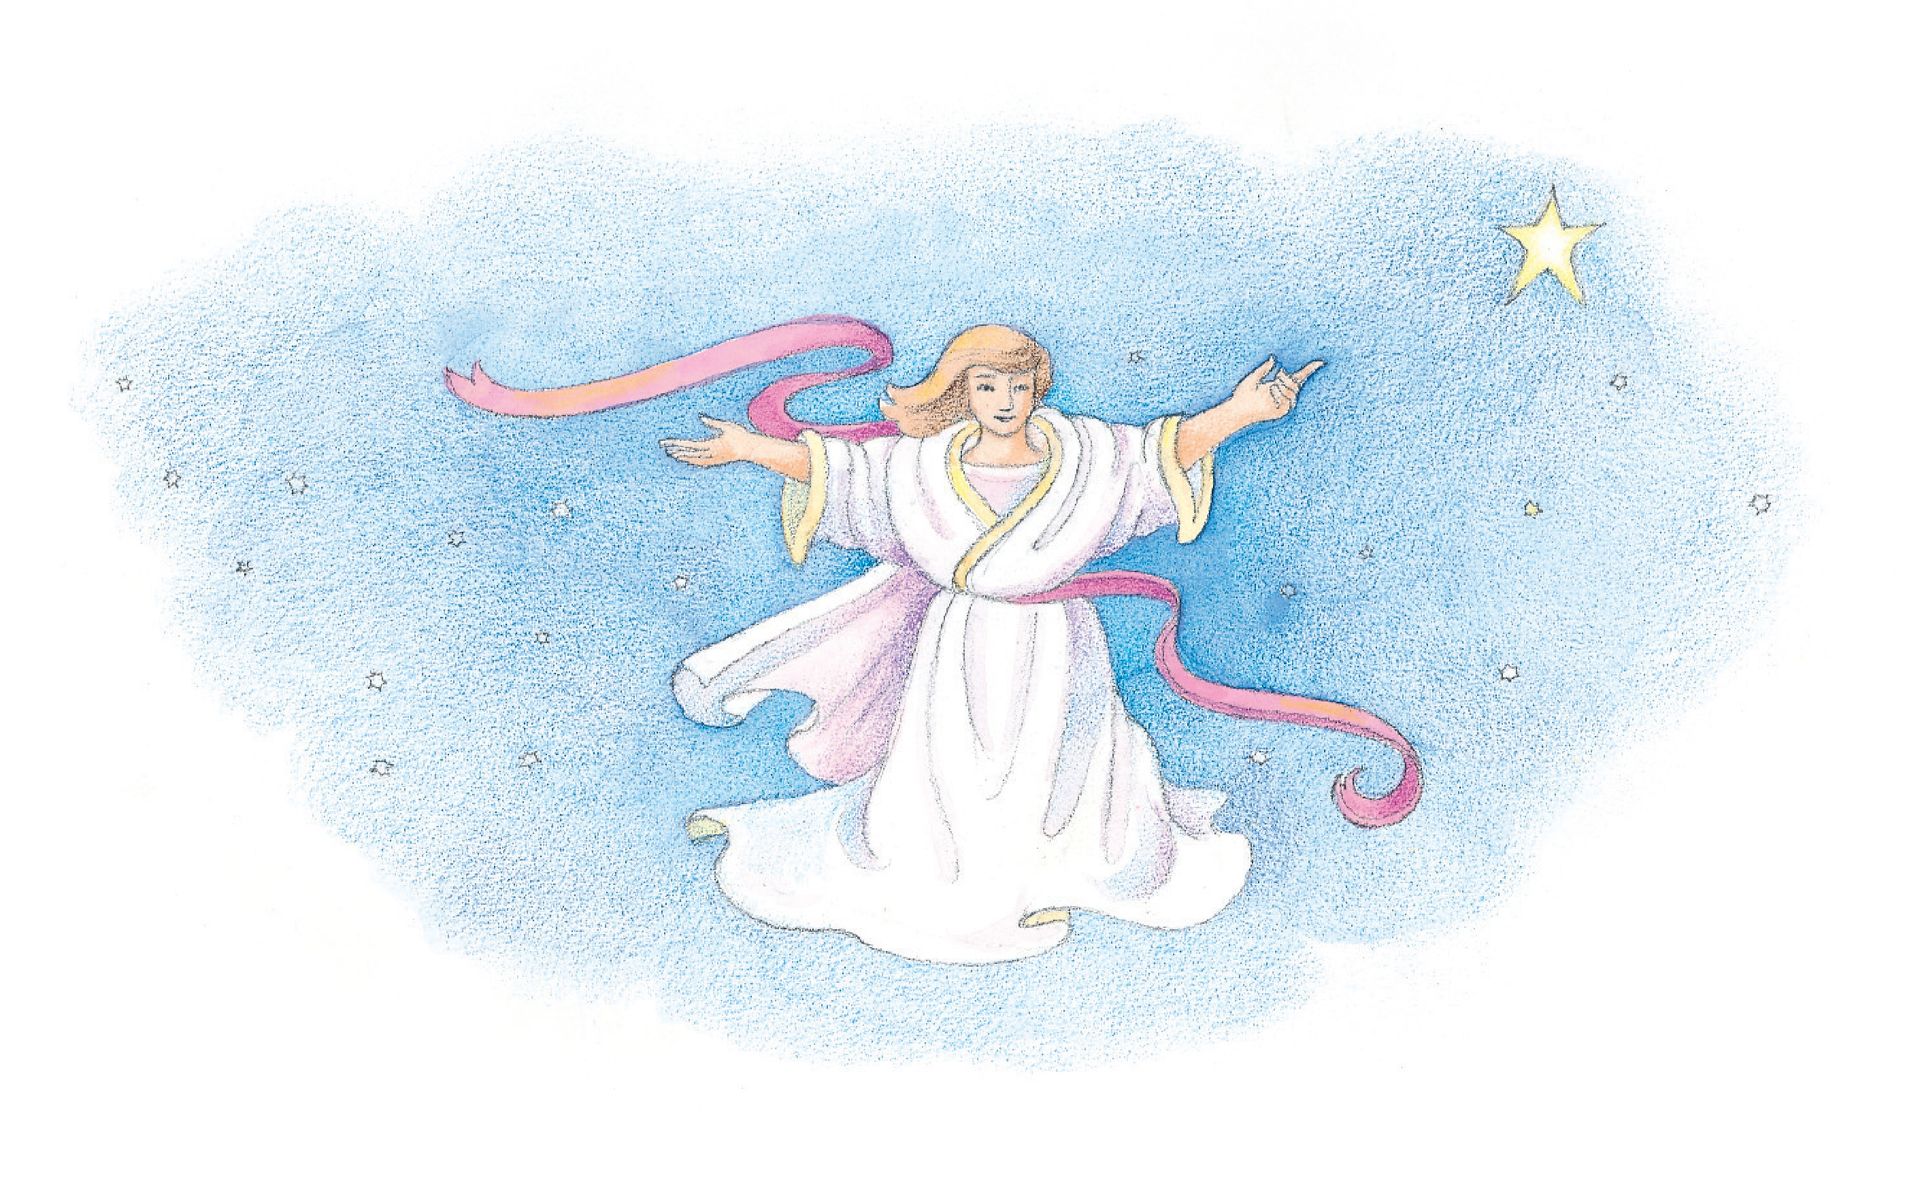 An angel standing in the sky. From the Children’s Songbook, page 52, “The Nativity Song”; watercolor illustration by Phyllis Luch.